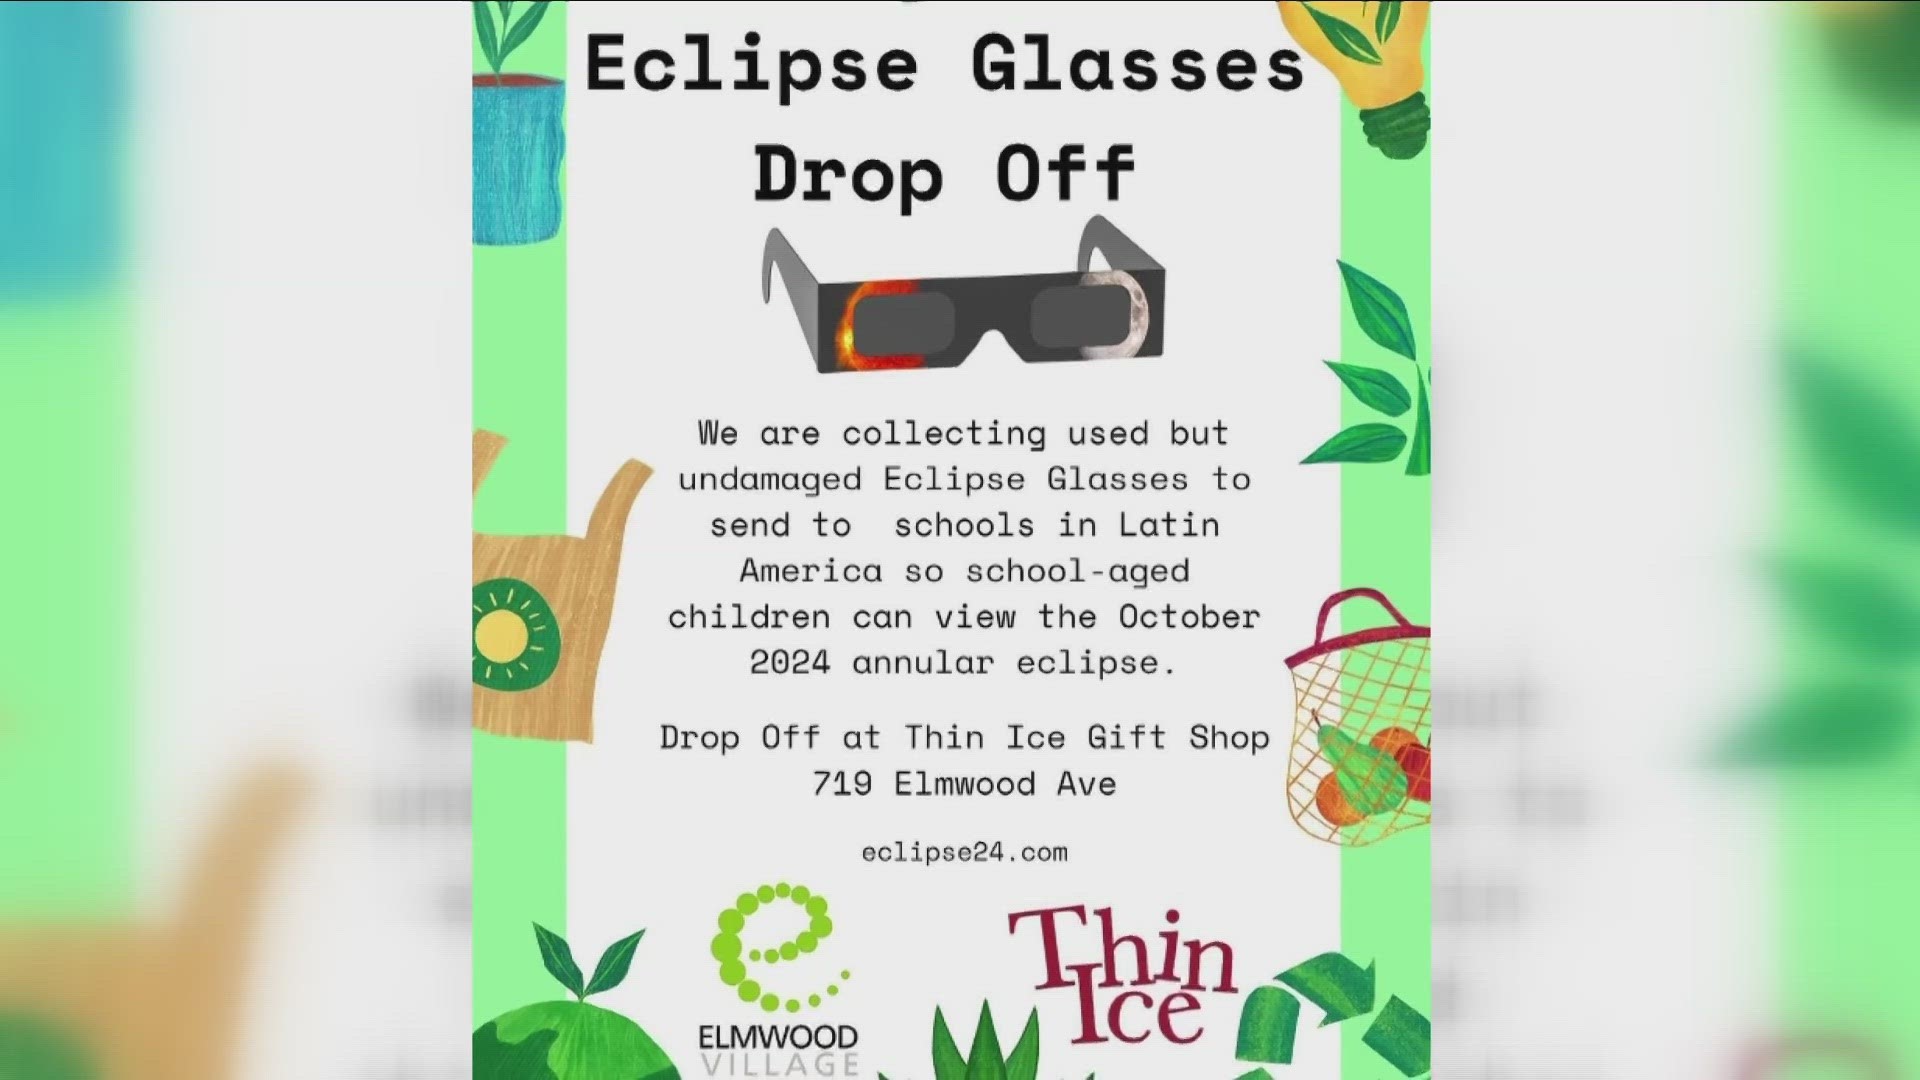 Now that the eclipse is over, think before you throw away your eclipse glasses. There are places around town you can drop them off to be donated.